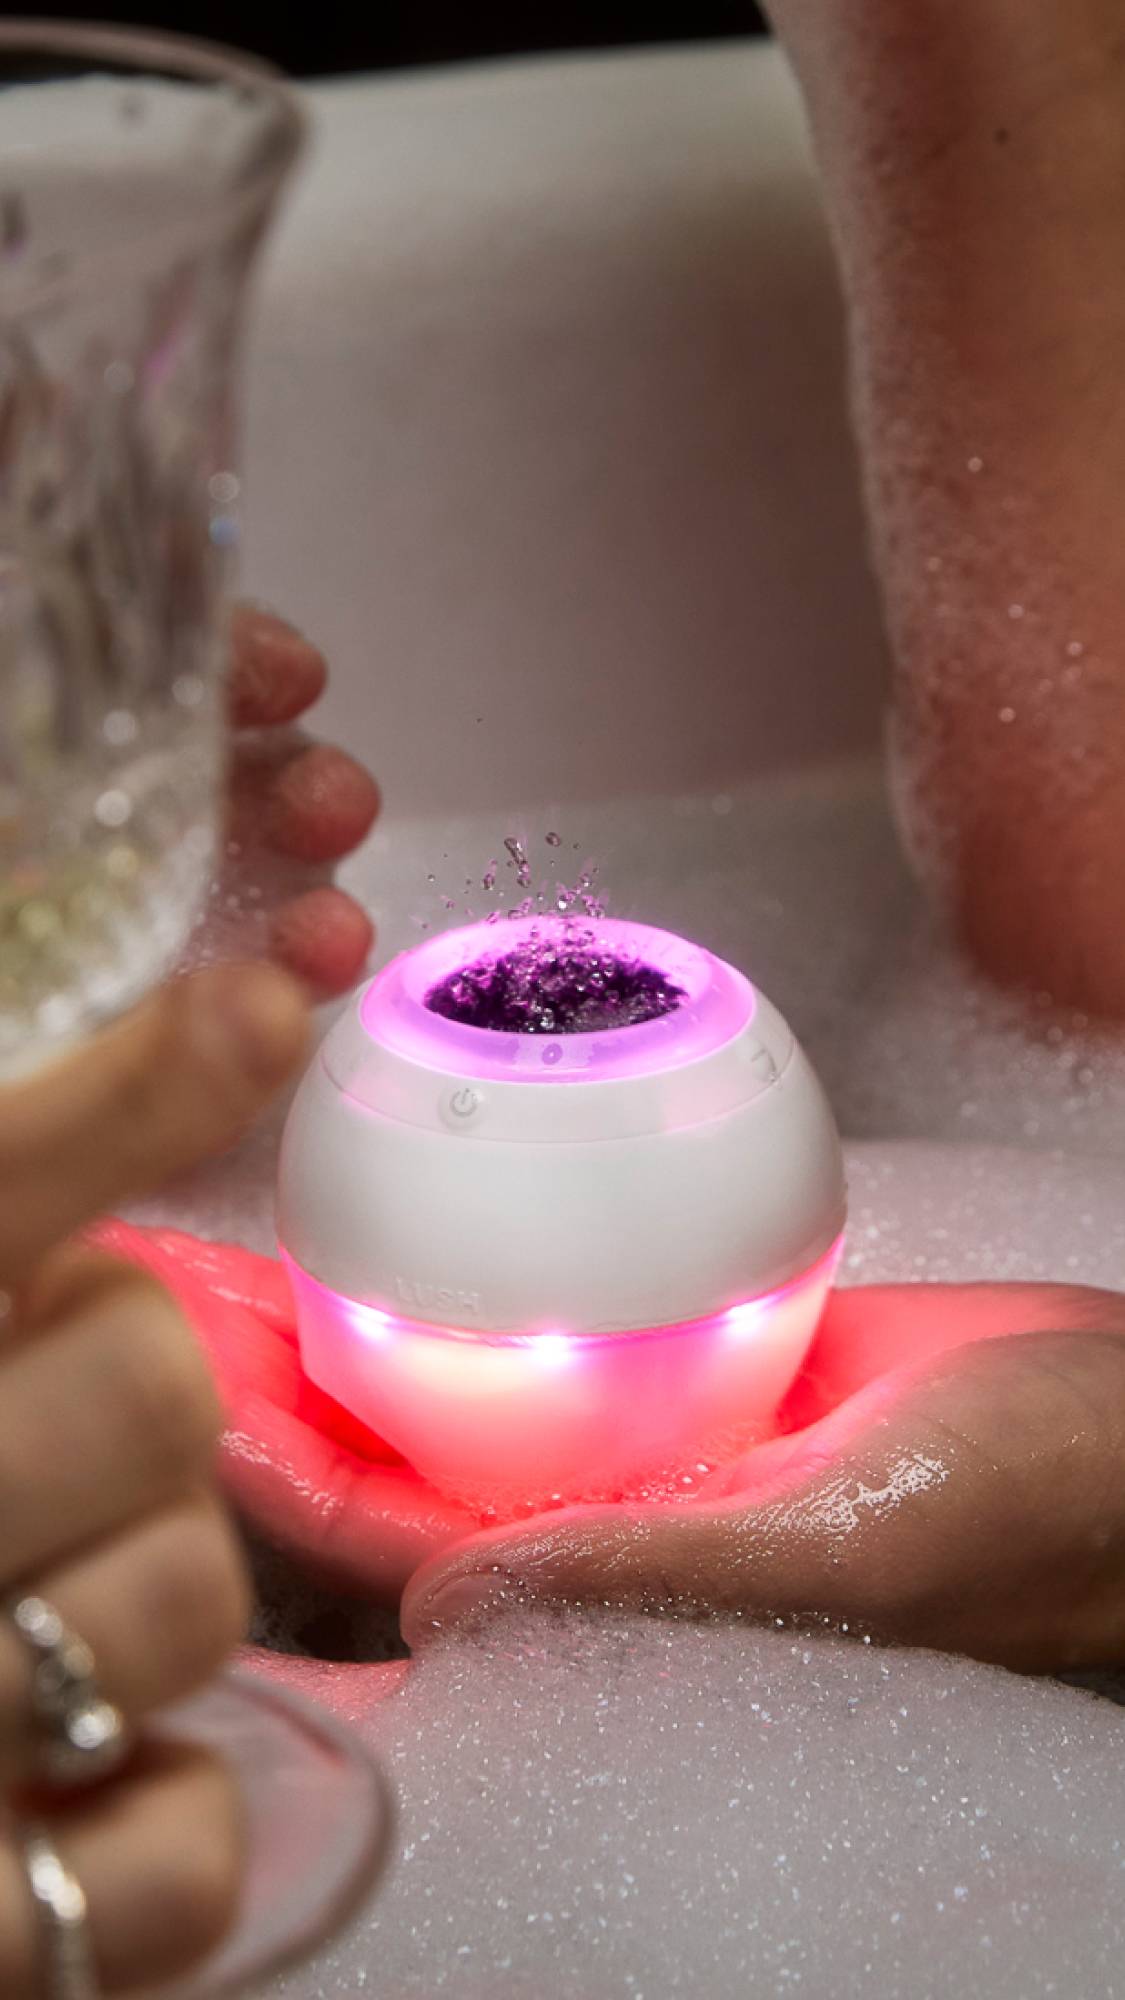 The model holds the Bath Bot in their hand above a very bubbly bath. The lower half of the Bath Bot is glowing a deep red-pink colour. The upper ring is glowing pink as droplets splash from the speaker. 